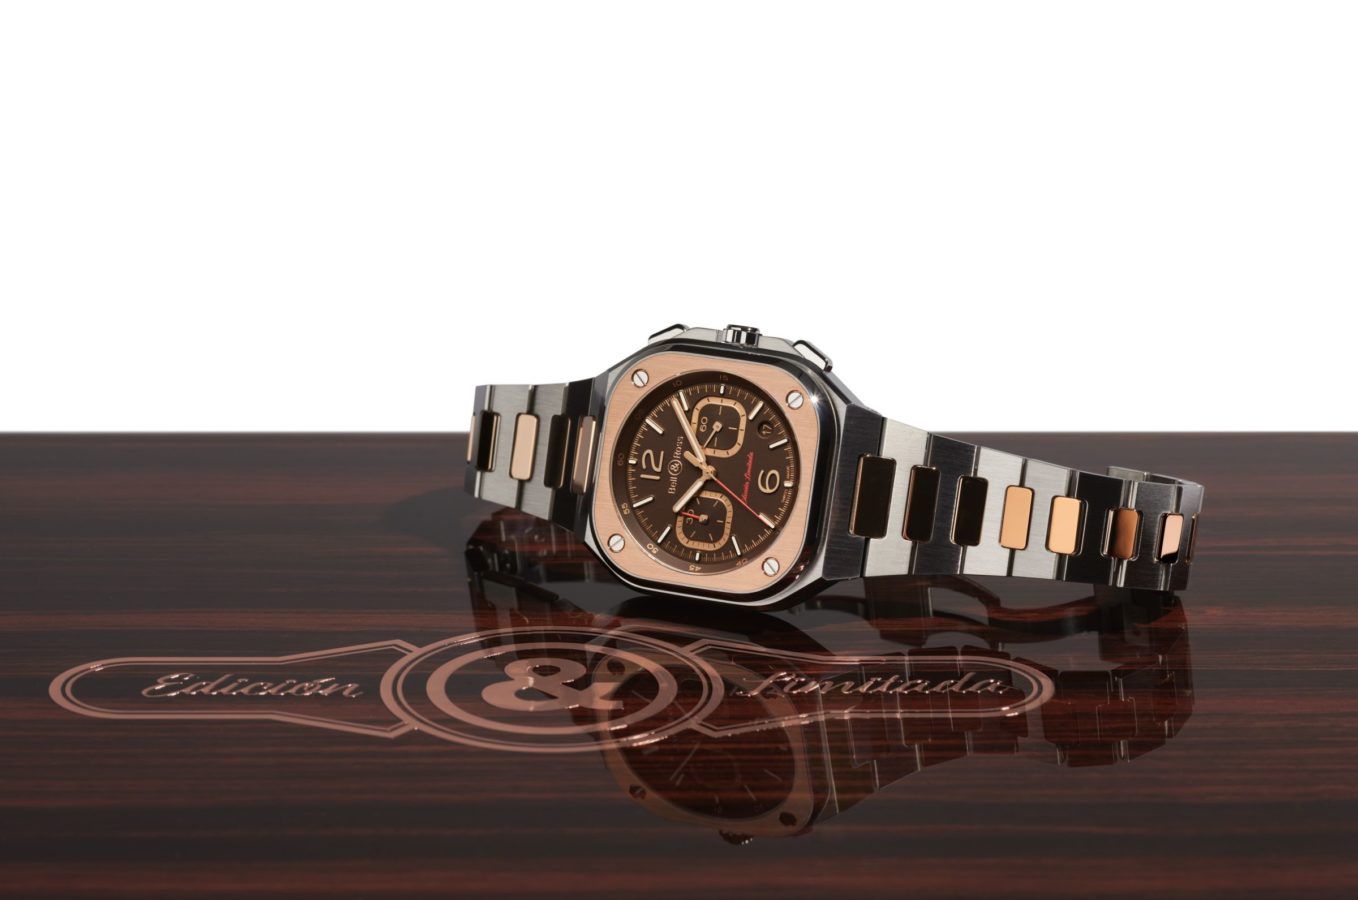 This Bell & Ross timepiece takes inspiration from fine cigars